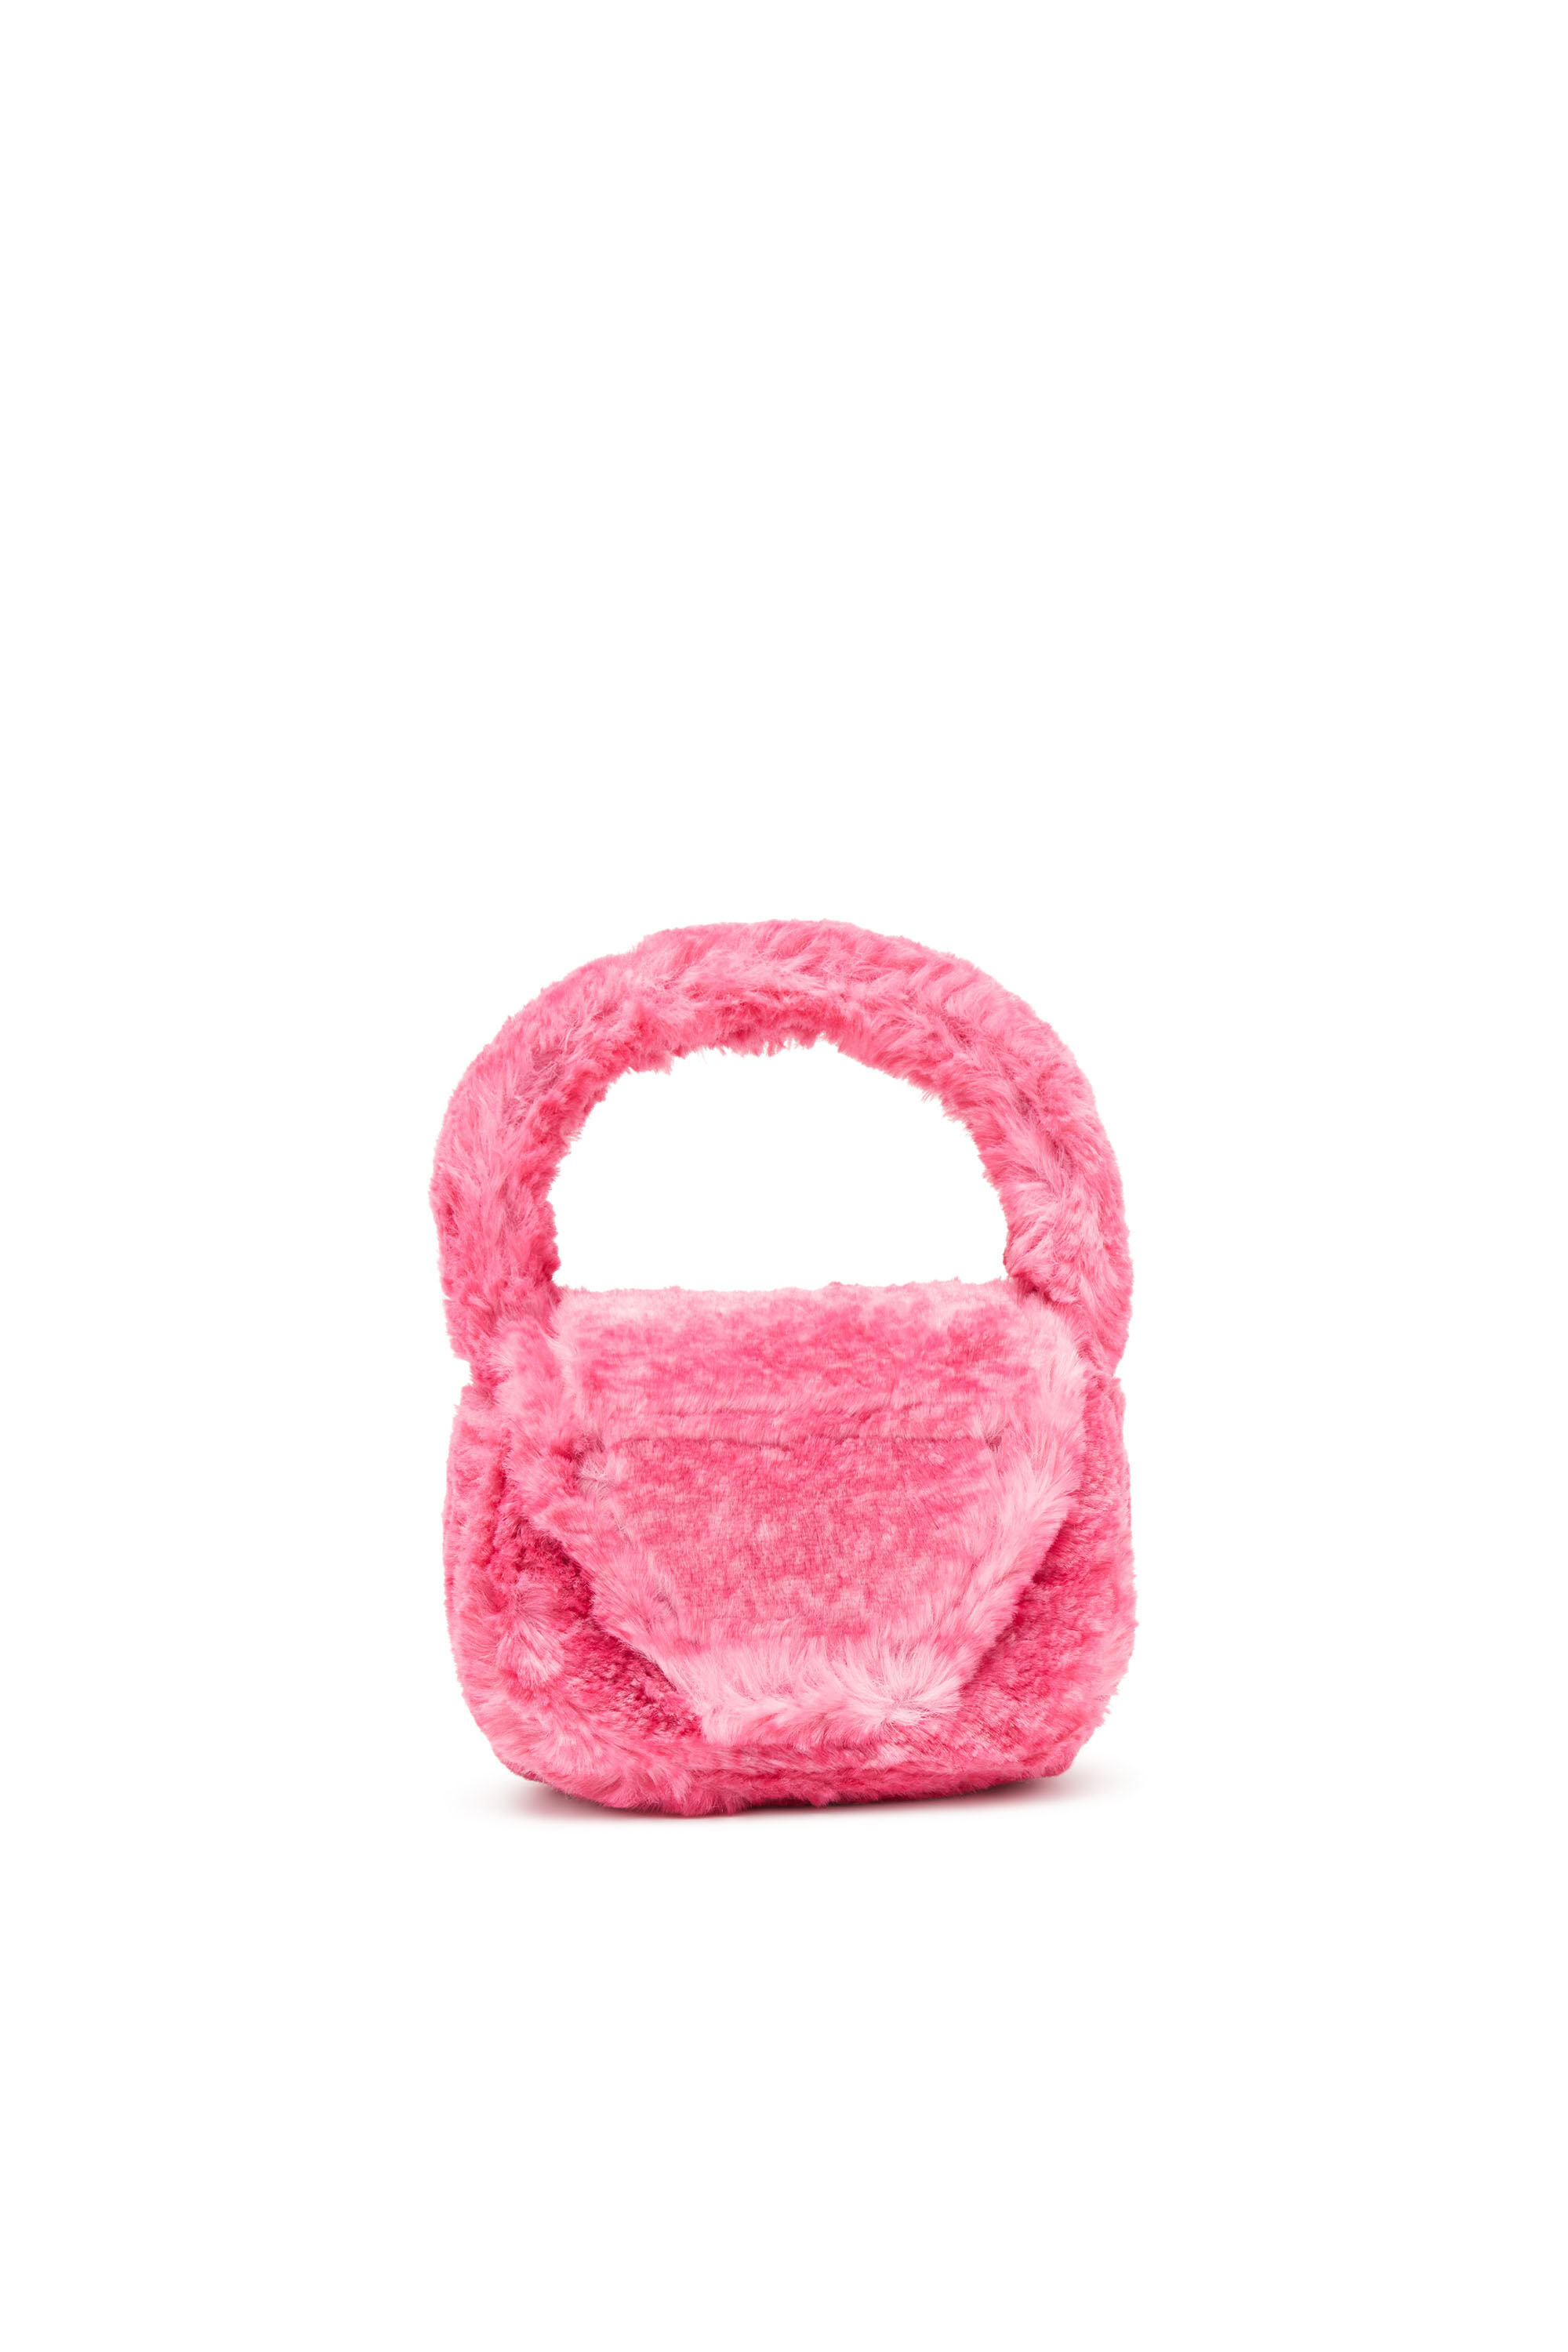 Diesel - 1DR XS, Woman 1DR Xs-Fluffy iconic mini bag in Pink - Image 3